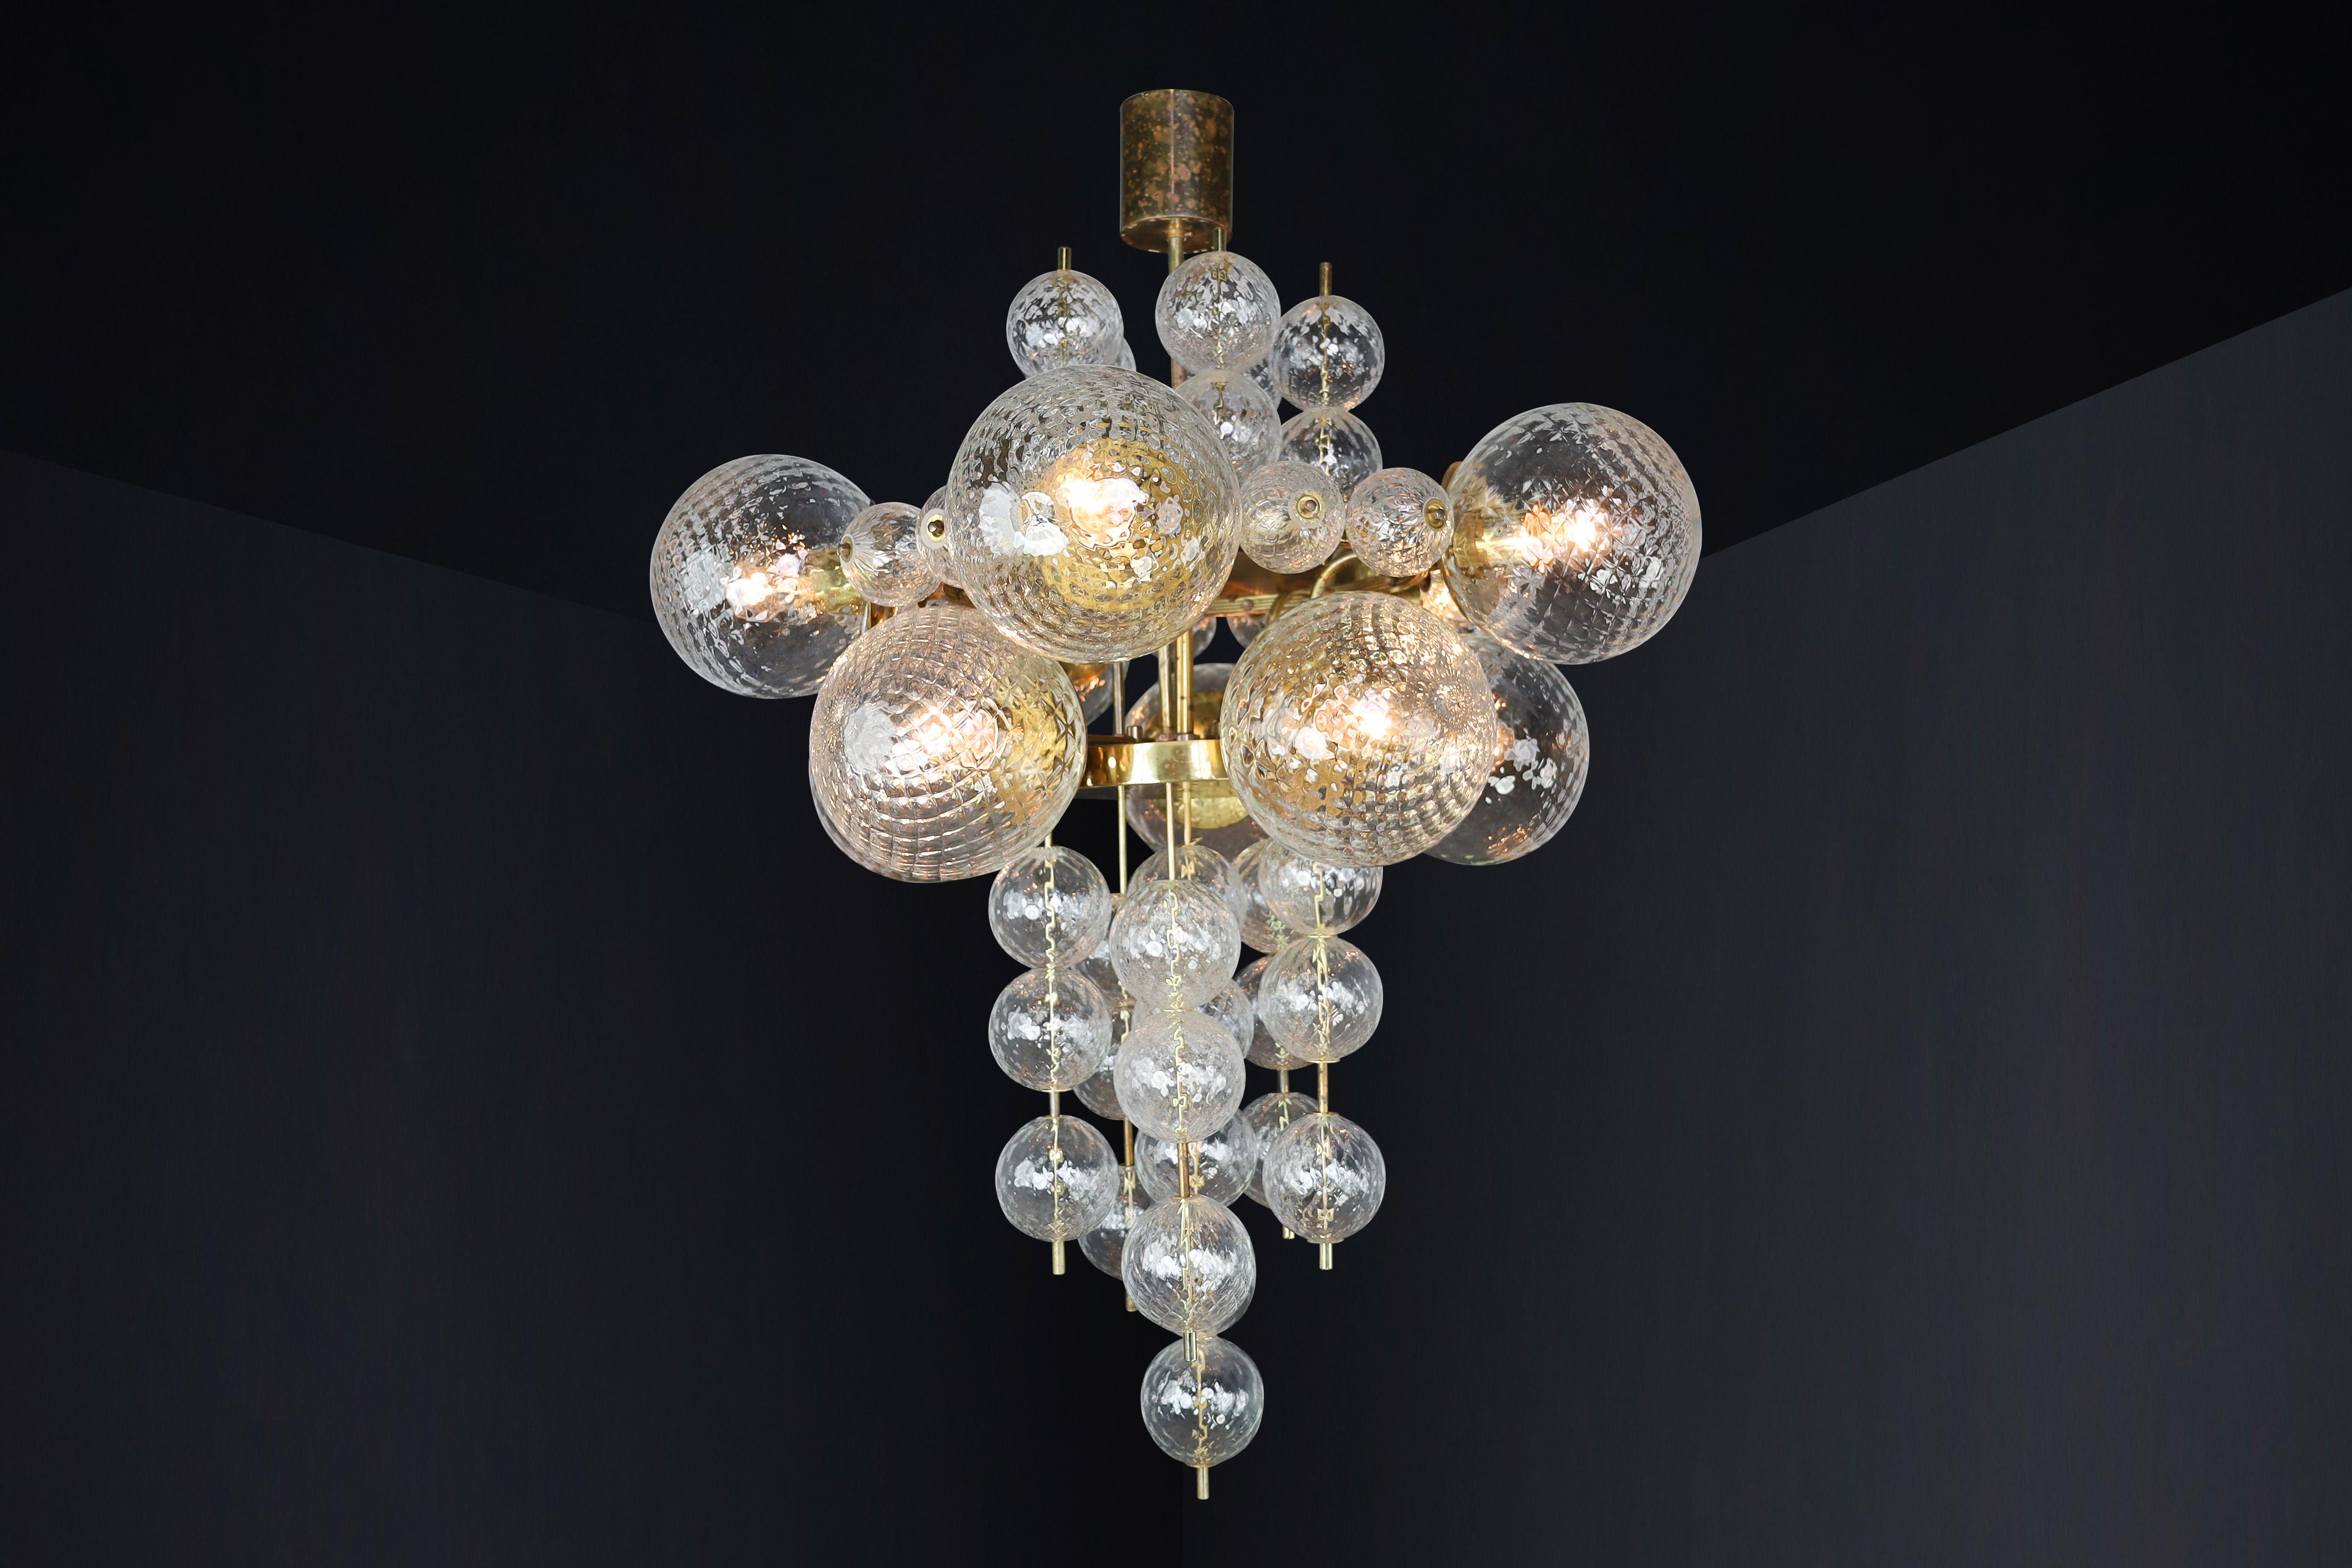  Chandelier with Patinated brass fixture and hand-blowed glass globes  CZ 1960s In Good Condition For Sale In Almelo, NL